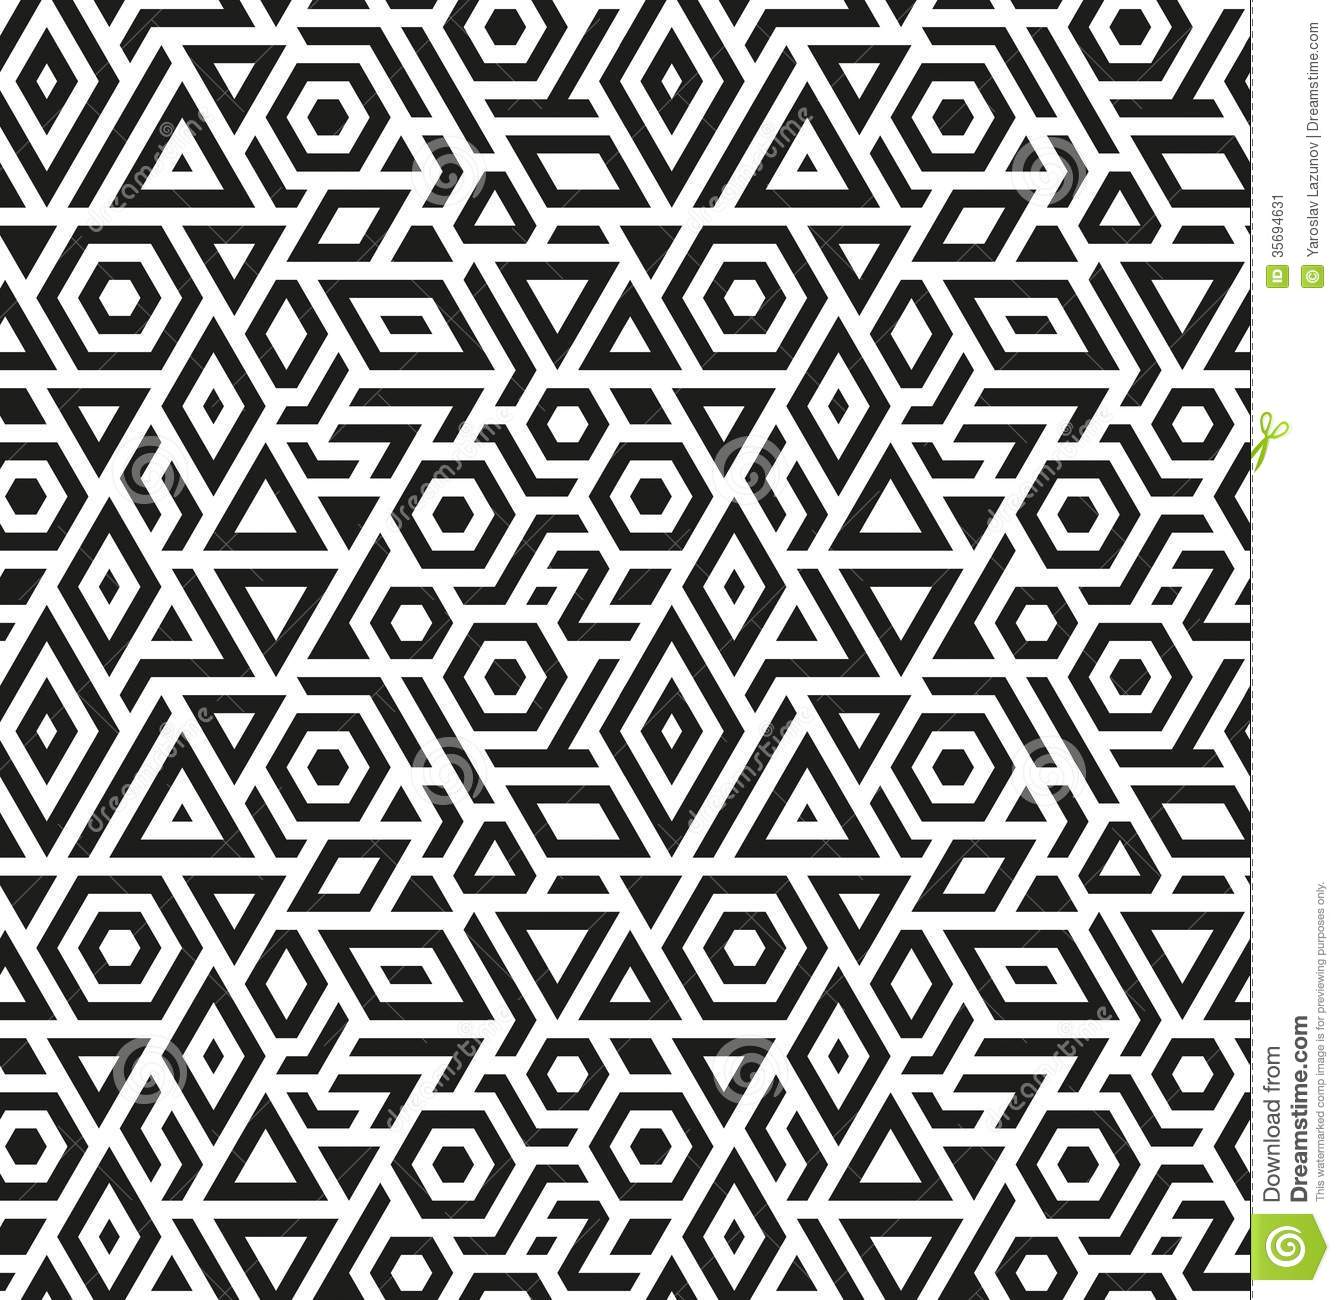 15 Vector Seamless Geometric Patterns Images